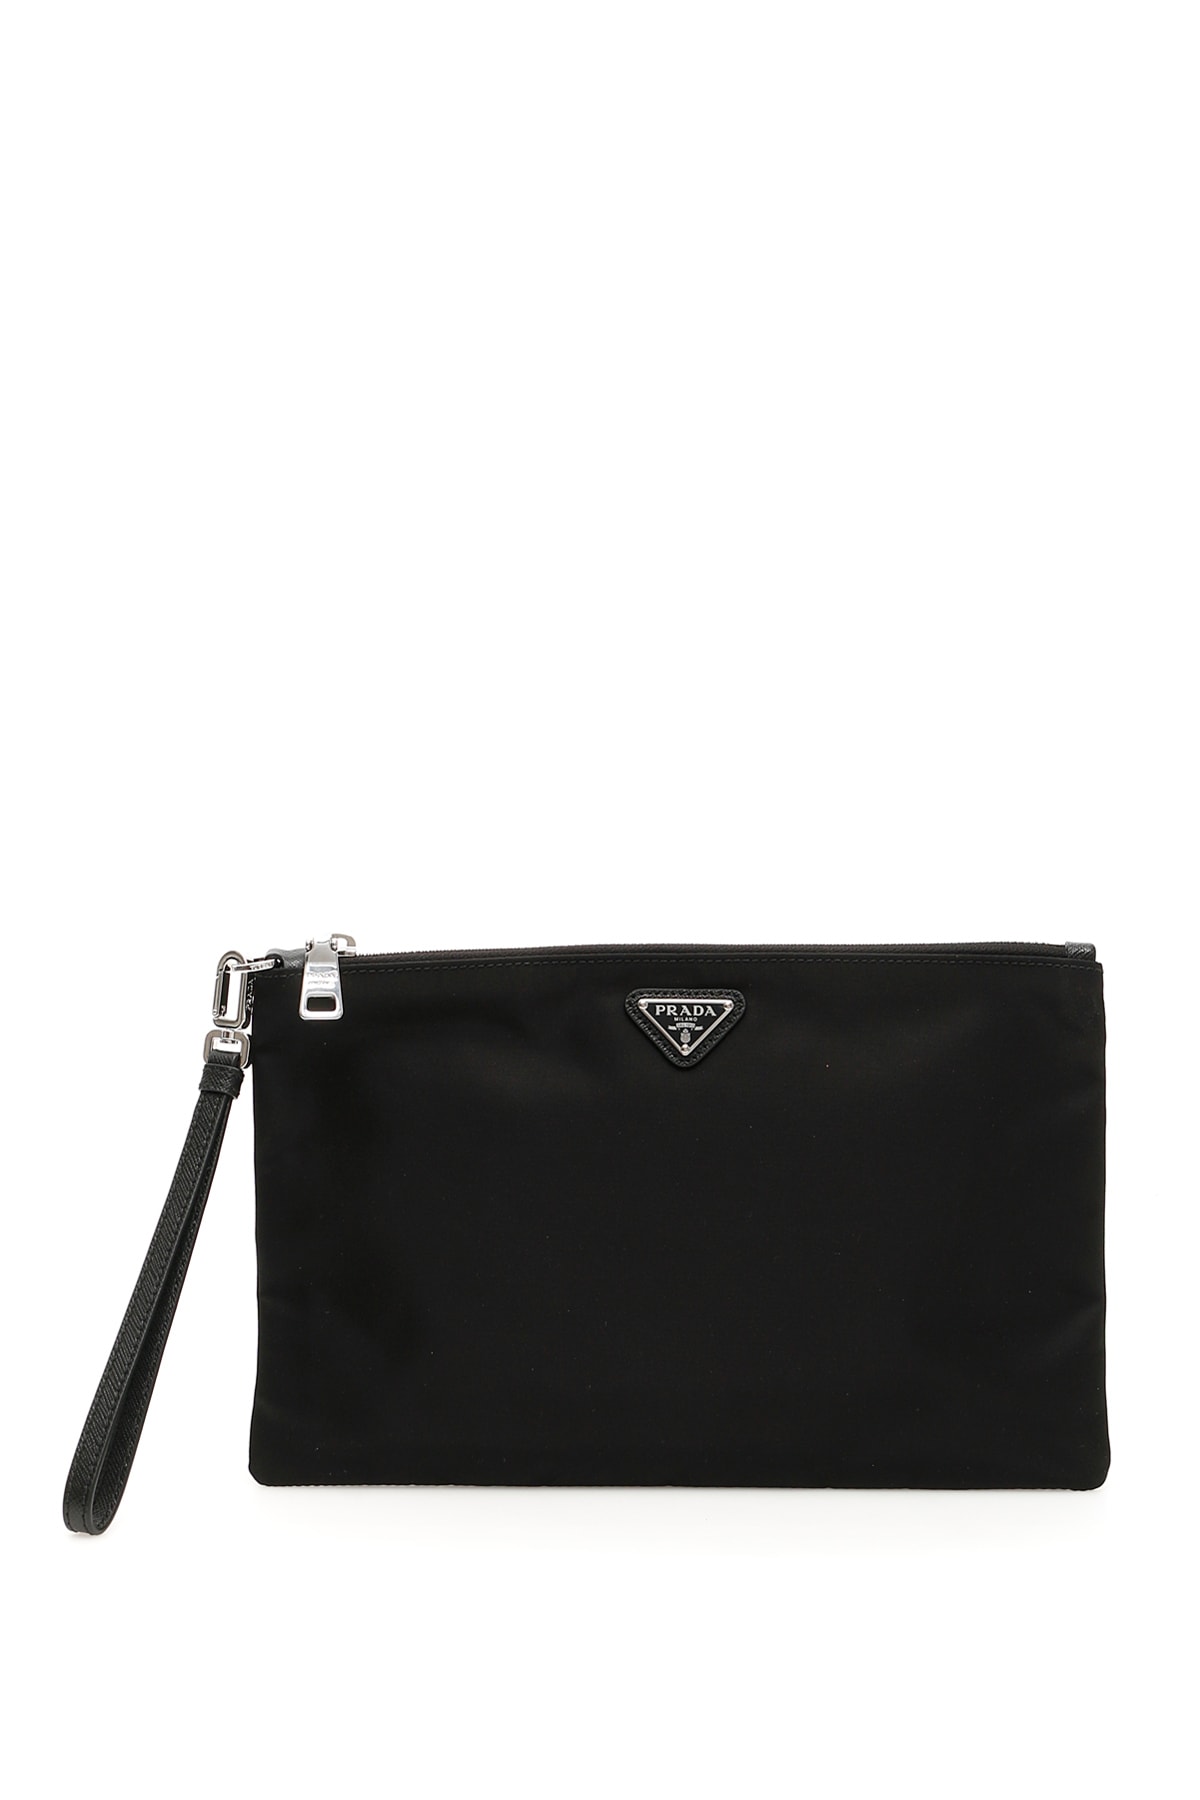 Prada Flat Pouch With Handle